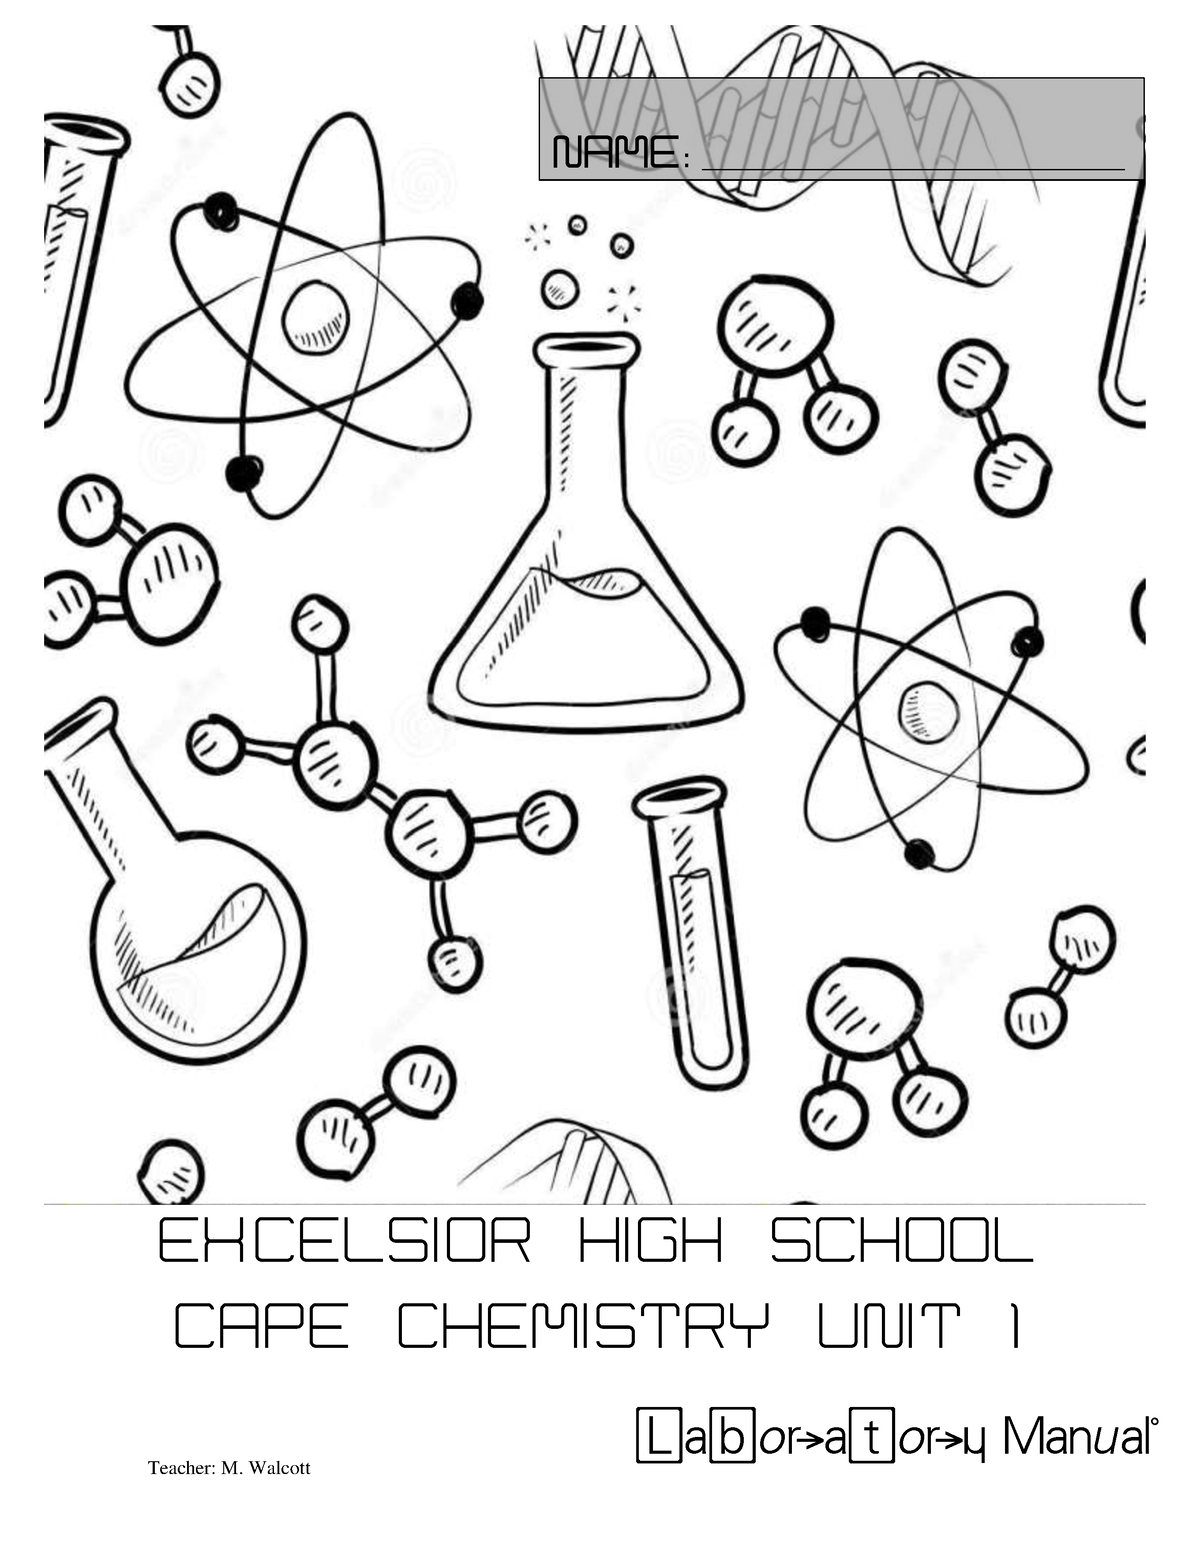 Abstract Hand-Drawn Chemistry Background